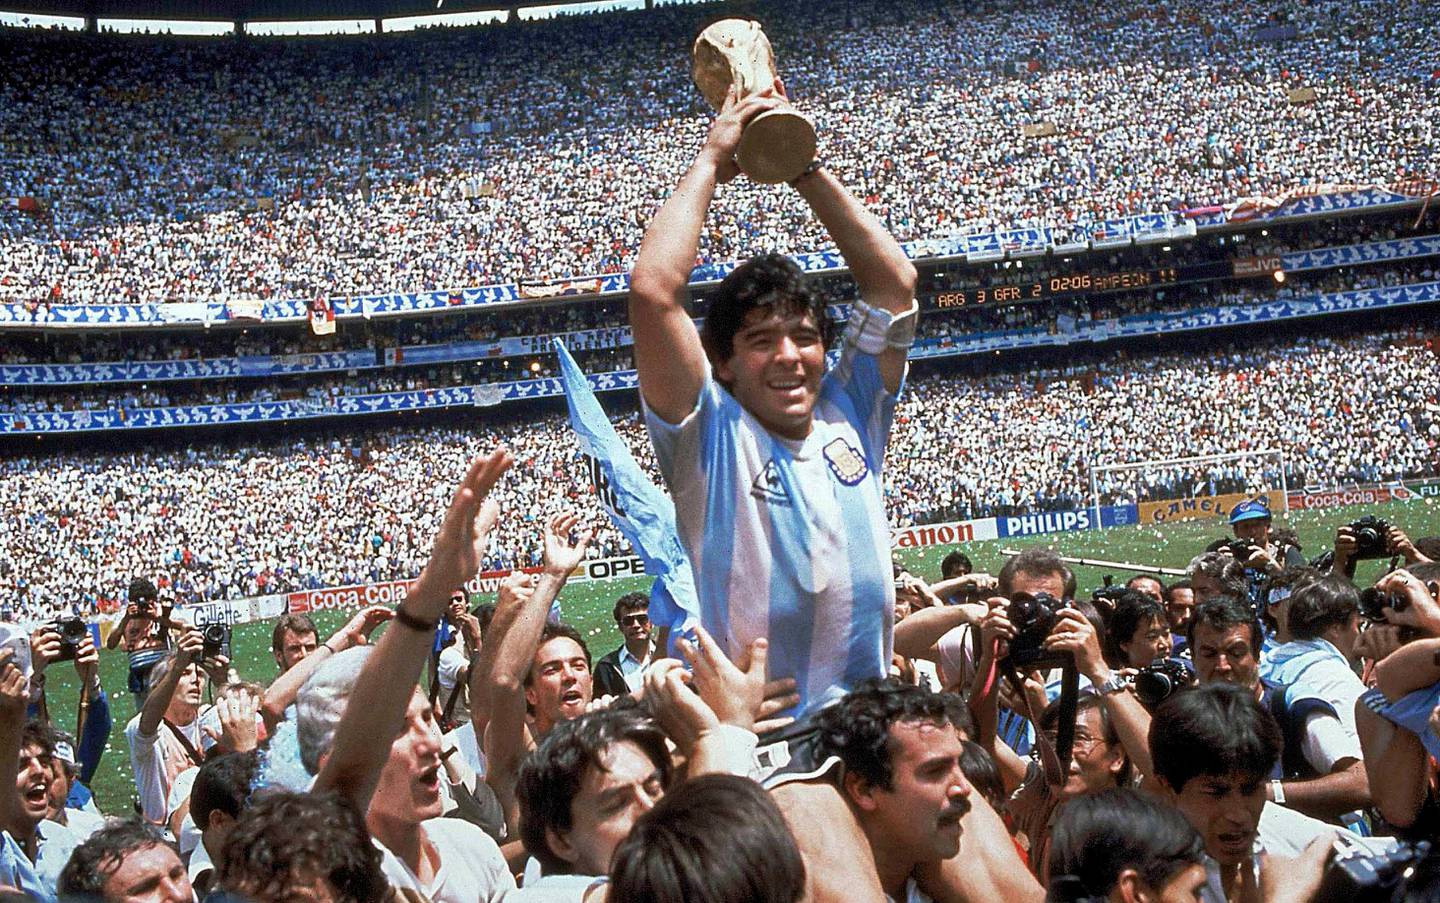  ** ADVANCE FOR WEEKEND EDITONS, MAY 29-30 **  FILE - In this June 29, 1986 file photo, Diego Maradona of Argentina, is lifted up as he holds the World Cup trophy after Argentina defeated West Germany 3-2 in the World Cup soccer final in the Atzeca Stadium, in Mexico City. (Ap Photo/Carlo Fumagalli, File)